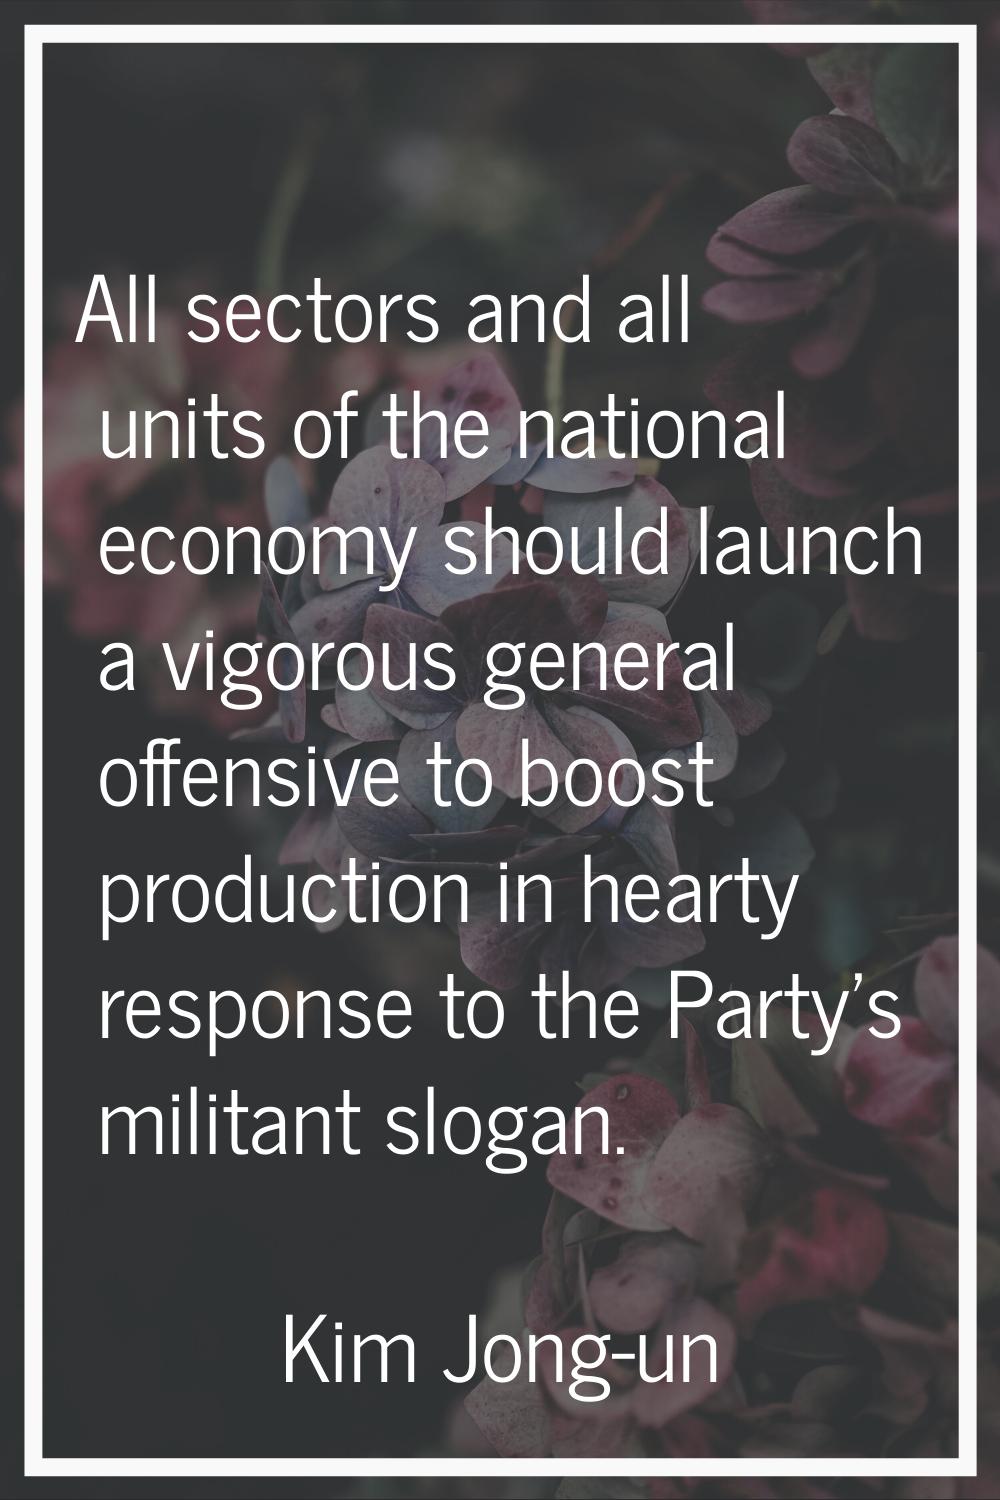 All sectors and all units of the national economy should launch a vigorous general offensive to boo